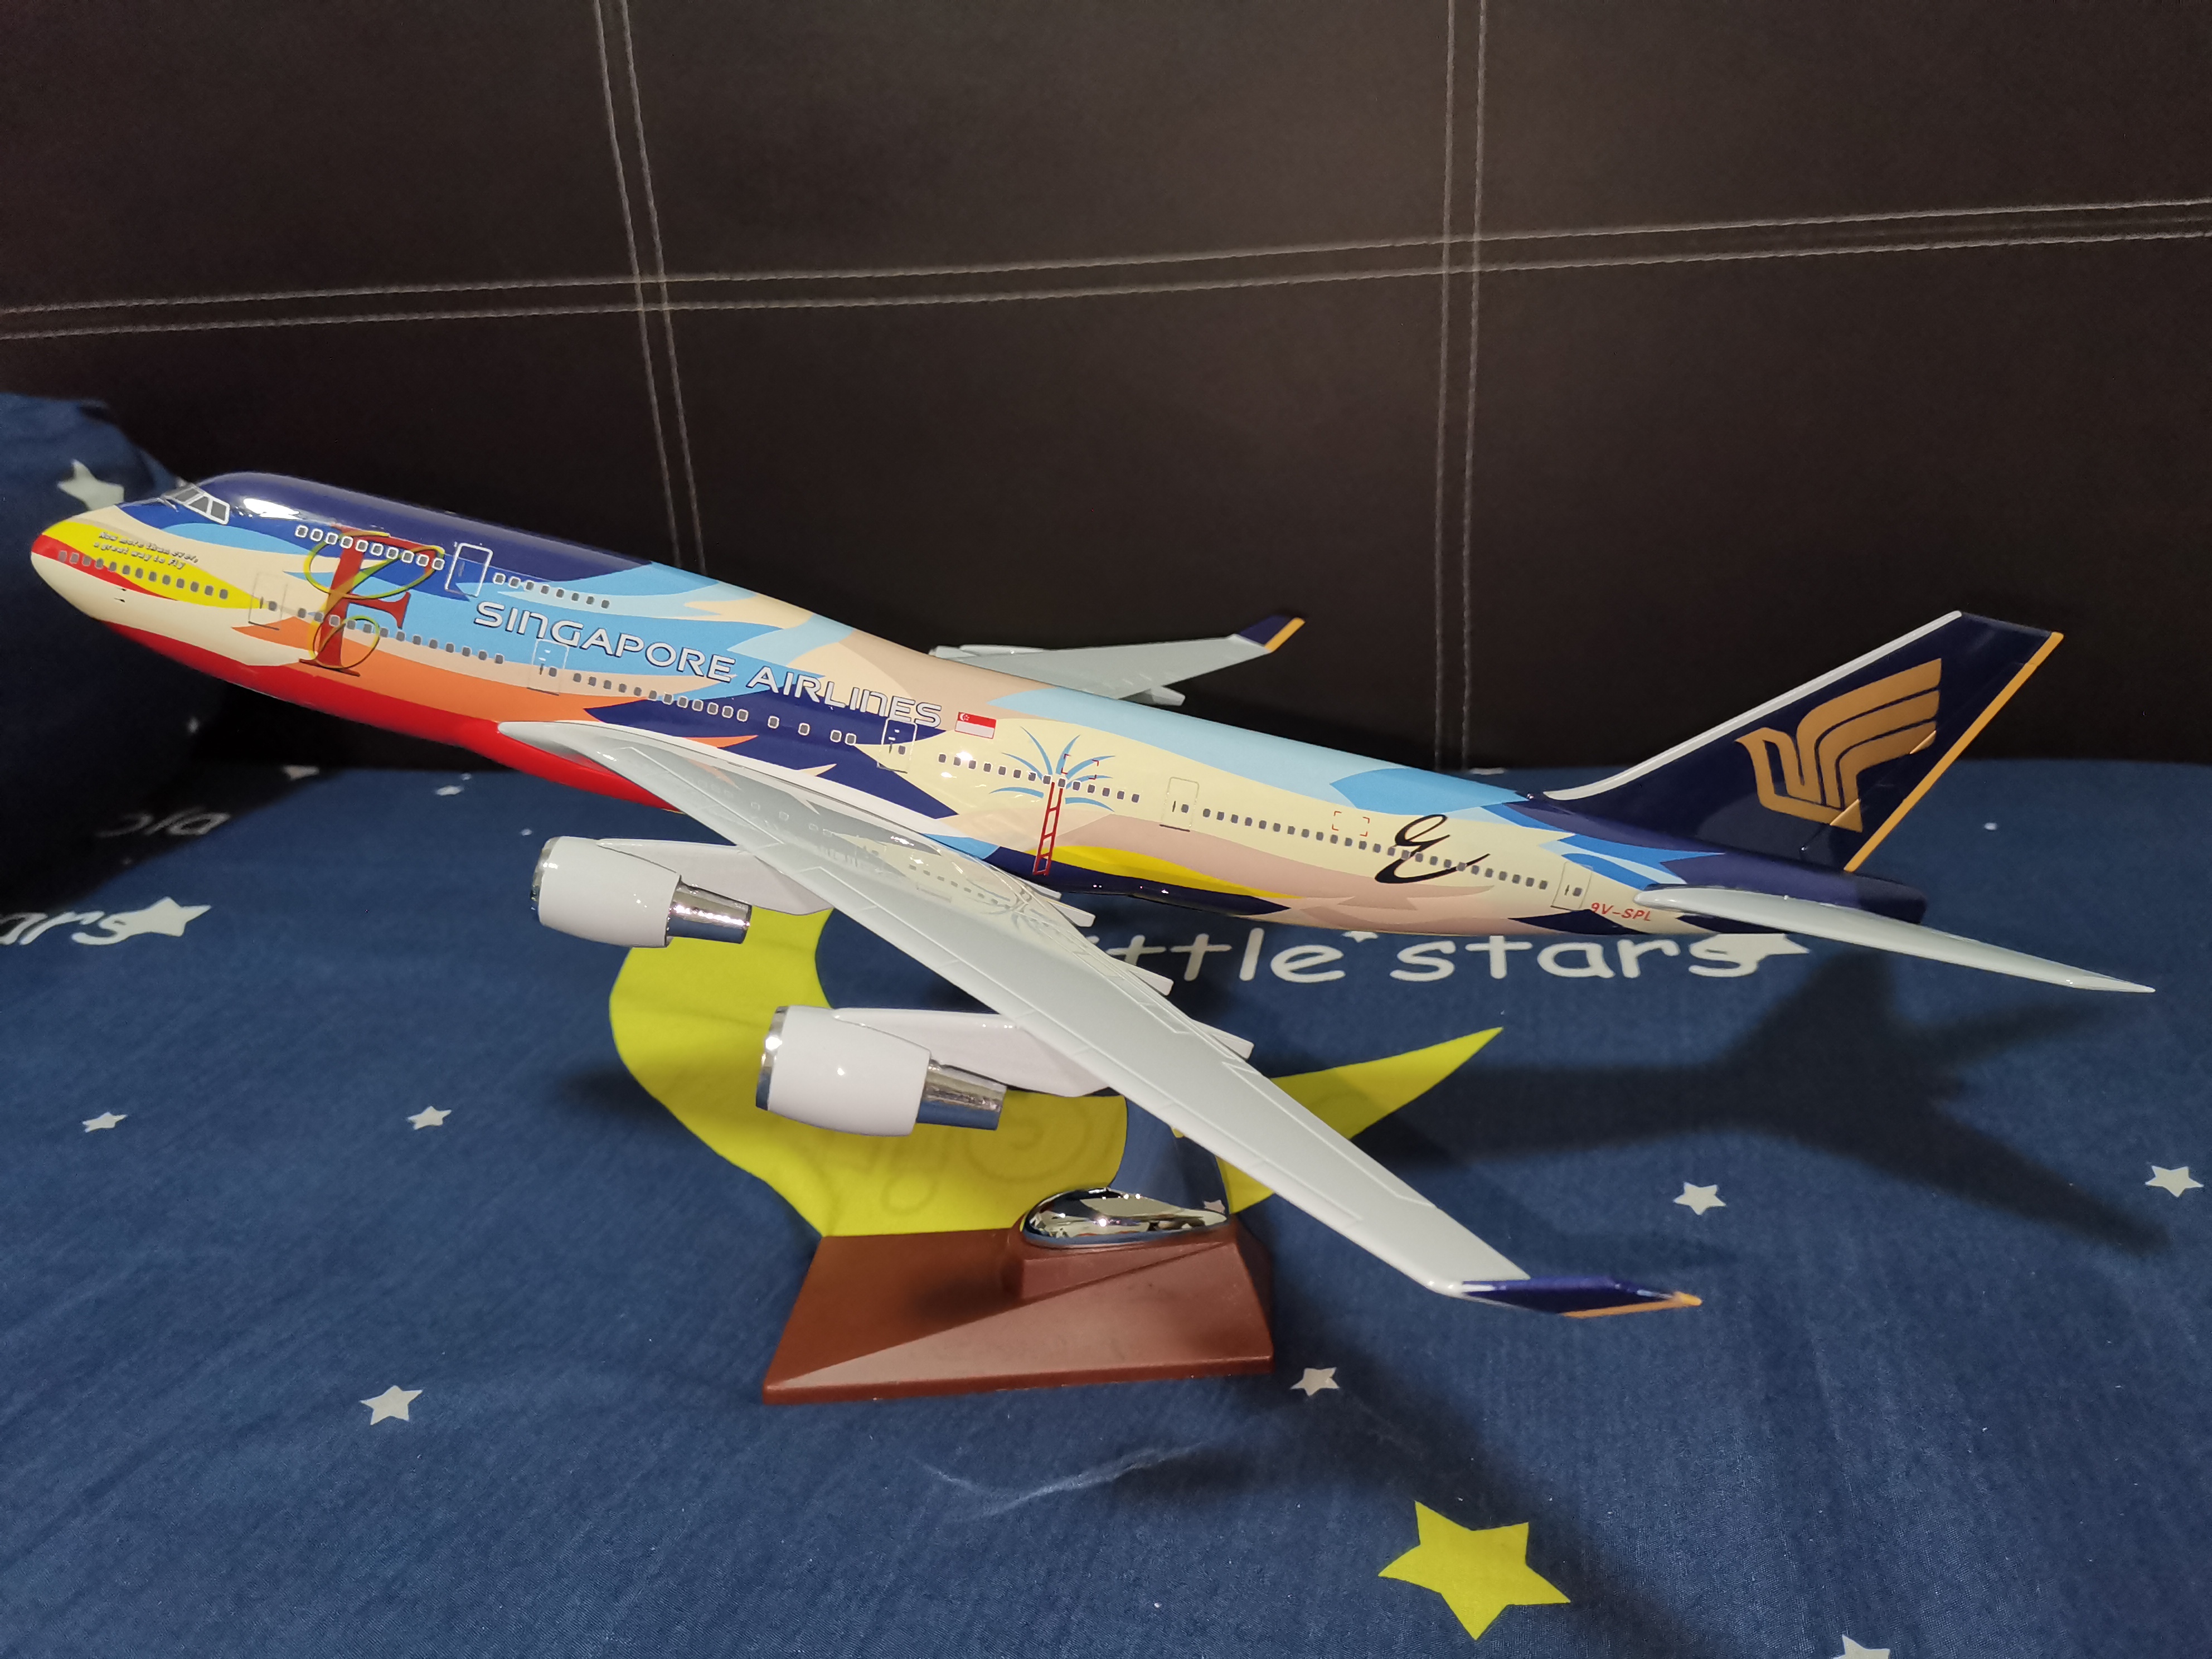 Singapore Airline (SIA) Boeing 747-400 Model (1:150) [Tropical